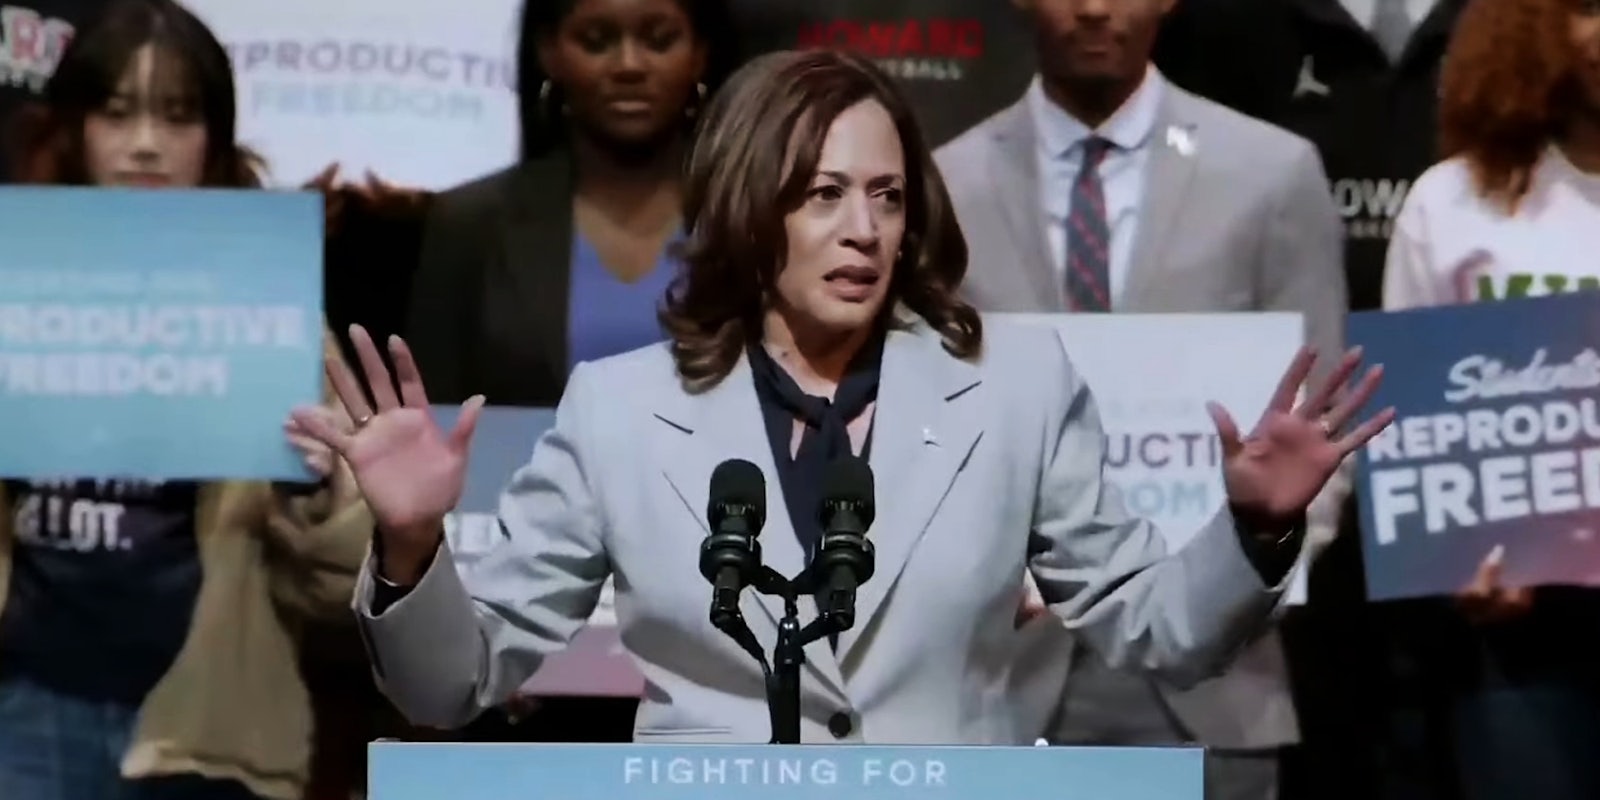 Kamala Harris speaking into microphone in front of crowd